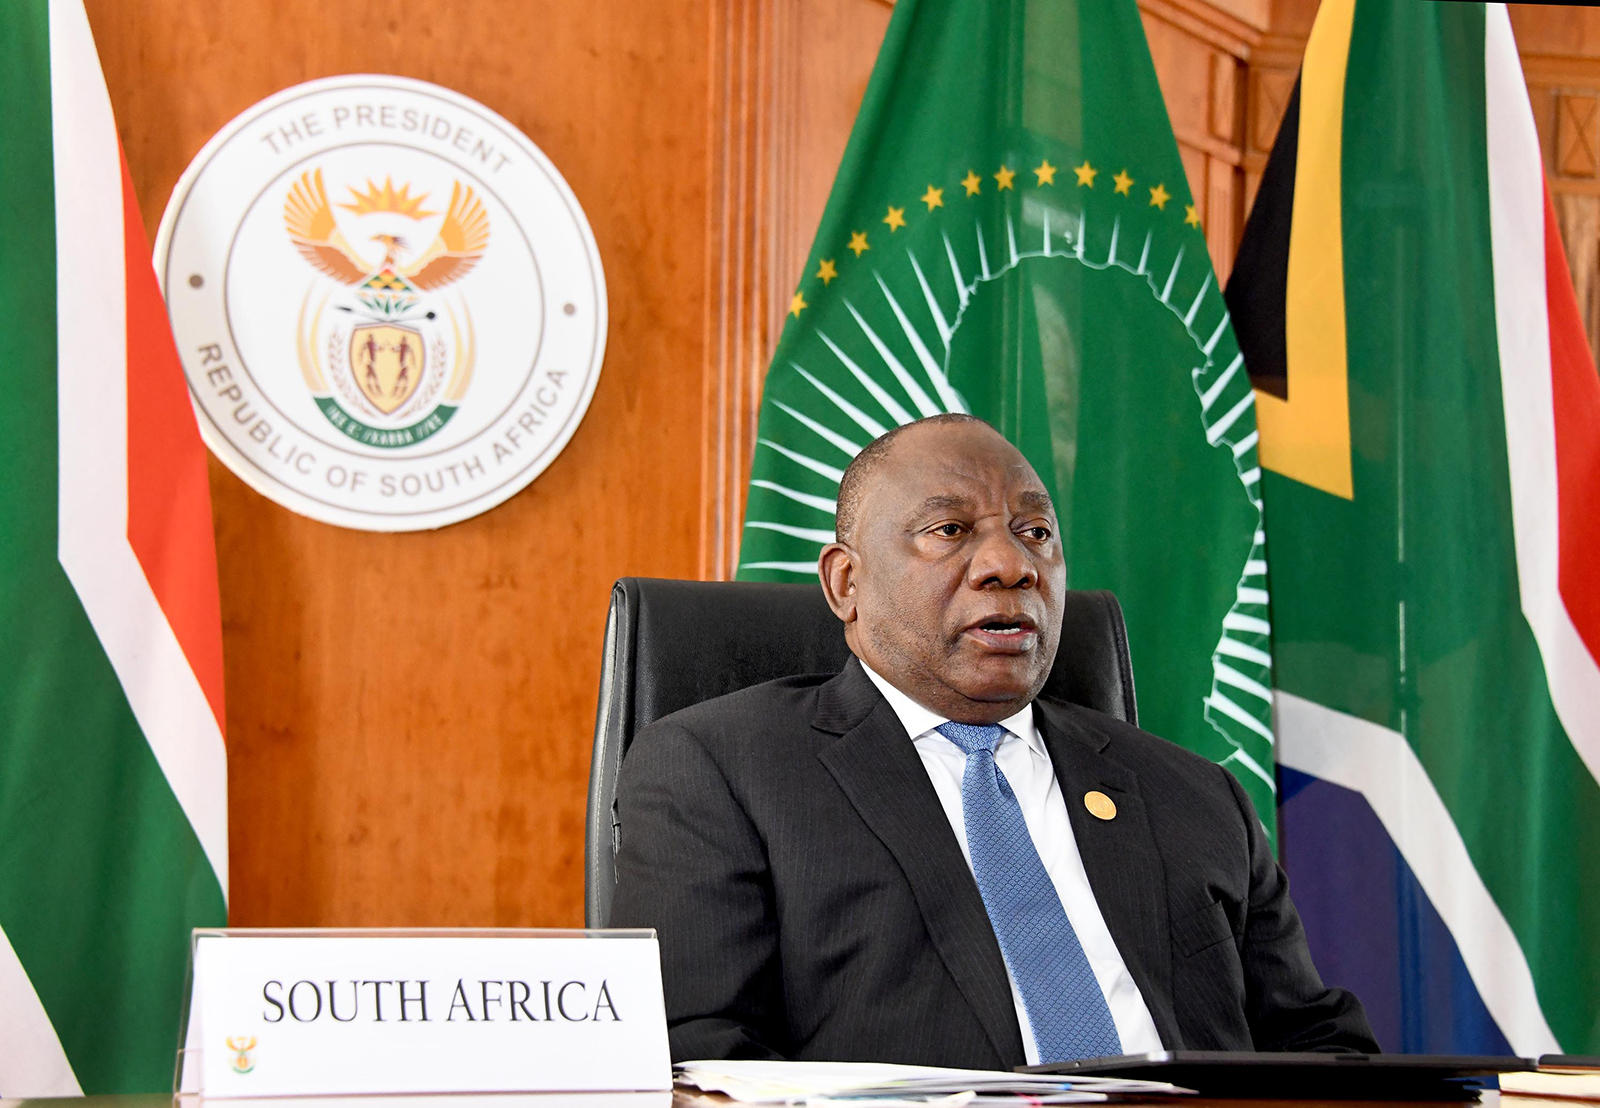 In this handout photo, South African President Cyril Ramaphosa speaks in Pretoria, South Africa, on June 17.